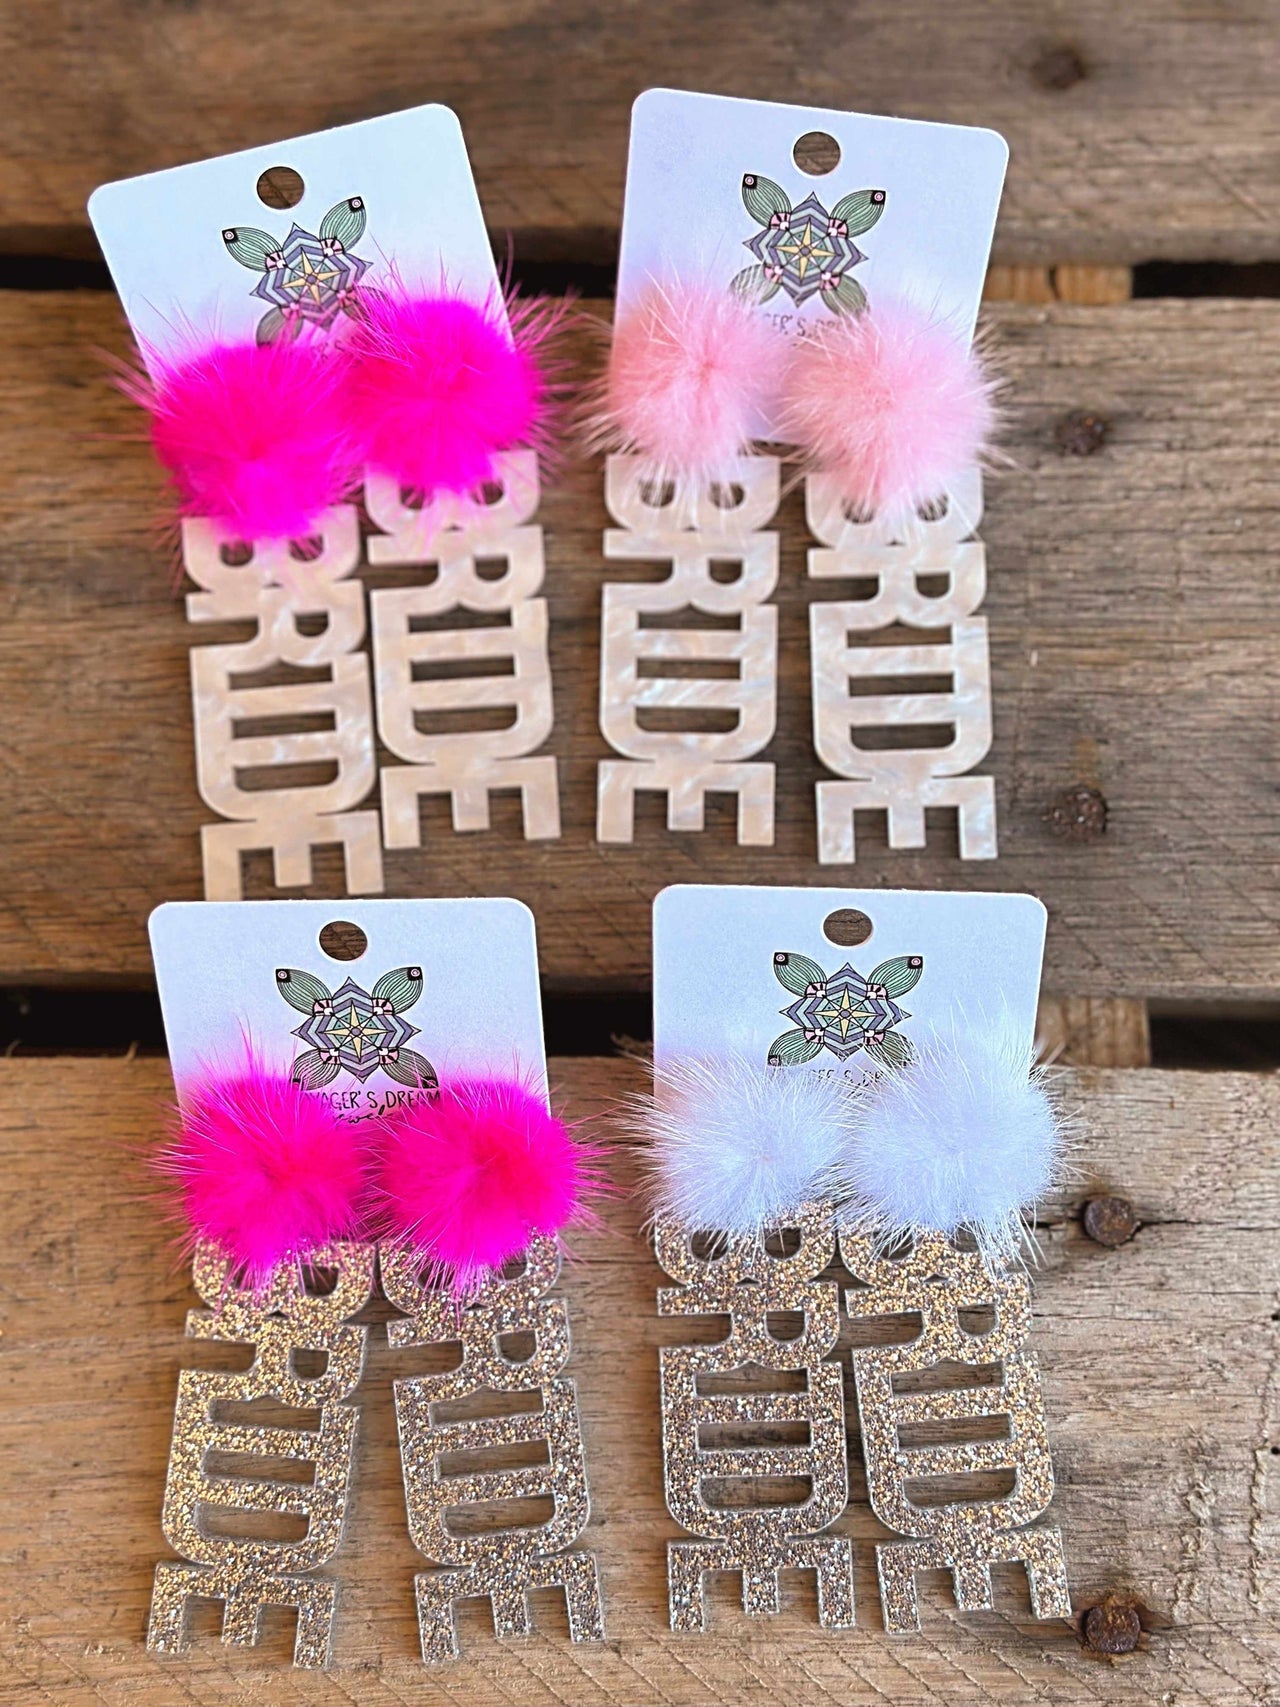 Here Comes The Bride Earrings - Silver Glitter With Hot Pink Pom